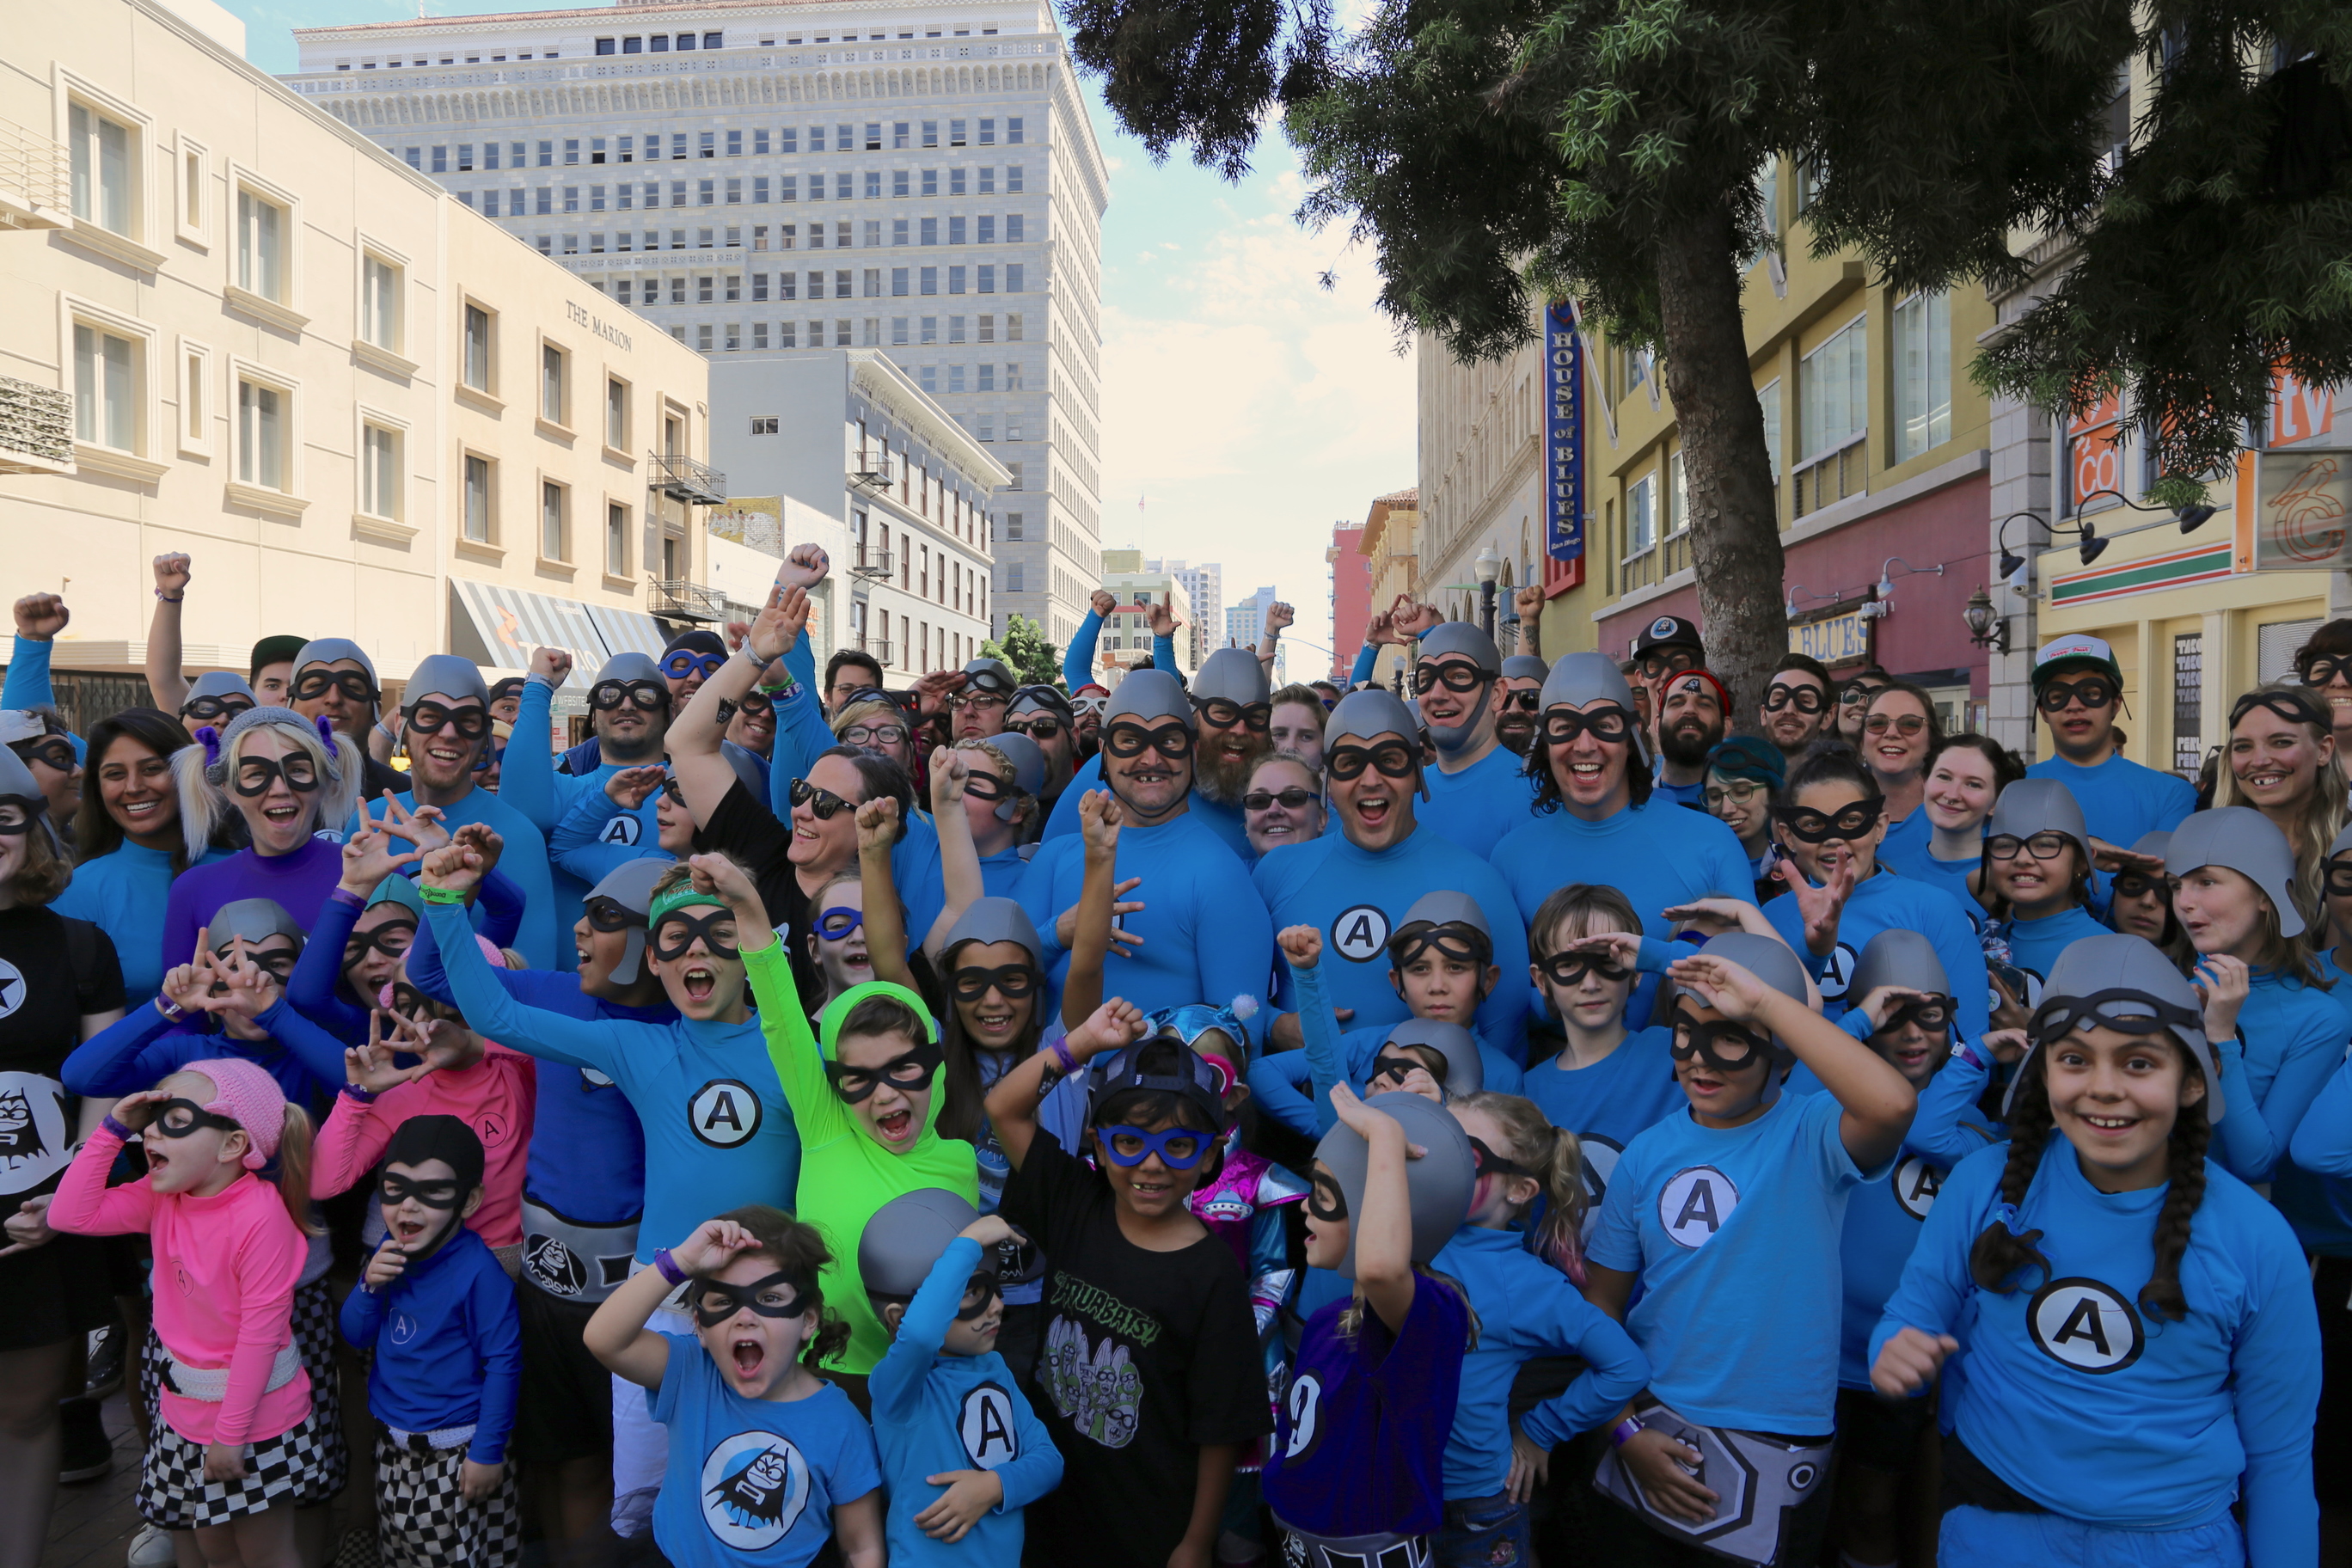 The Aquabats at San Diego's Comic-Con with fans